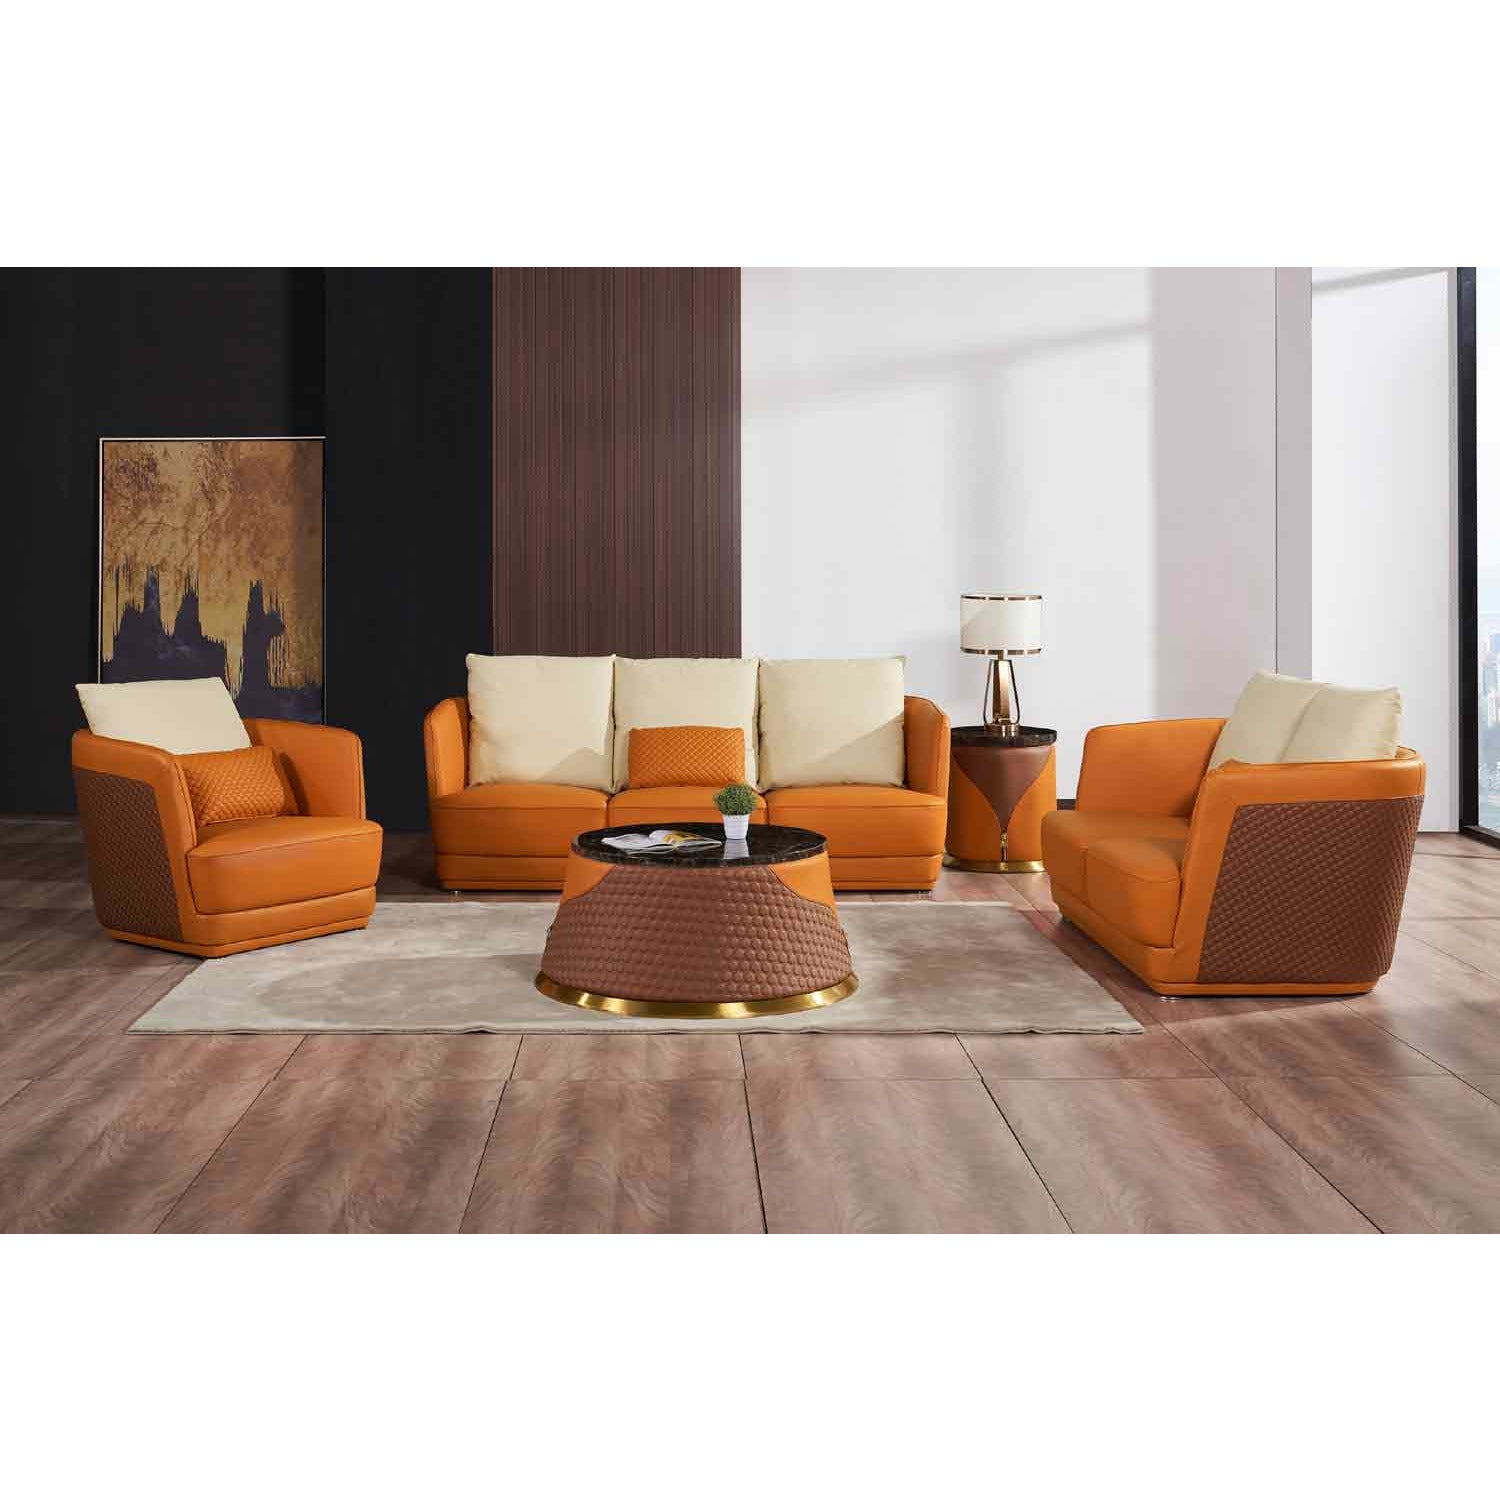 European Furniture - Glamour Coffee Table in Orange-Brown - 51619-CT - New Star Living